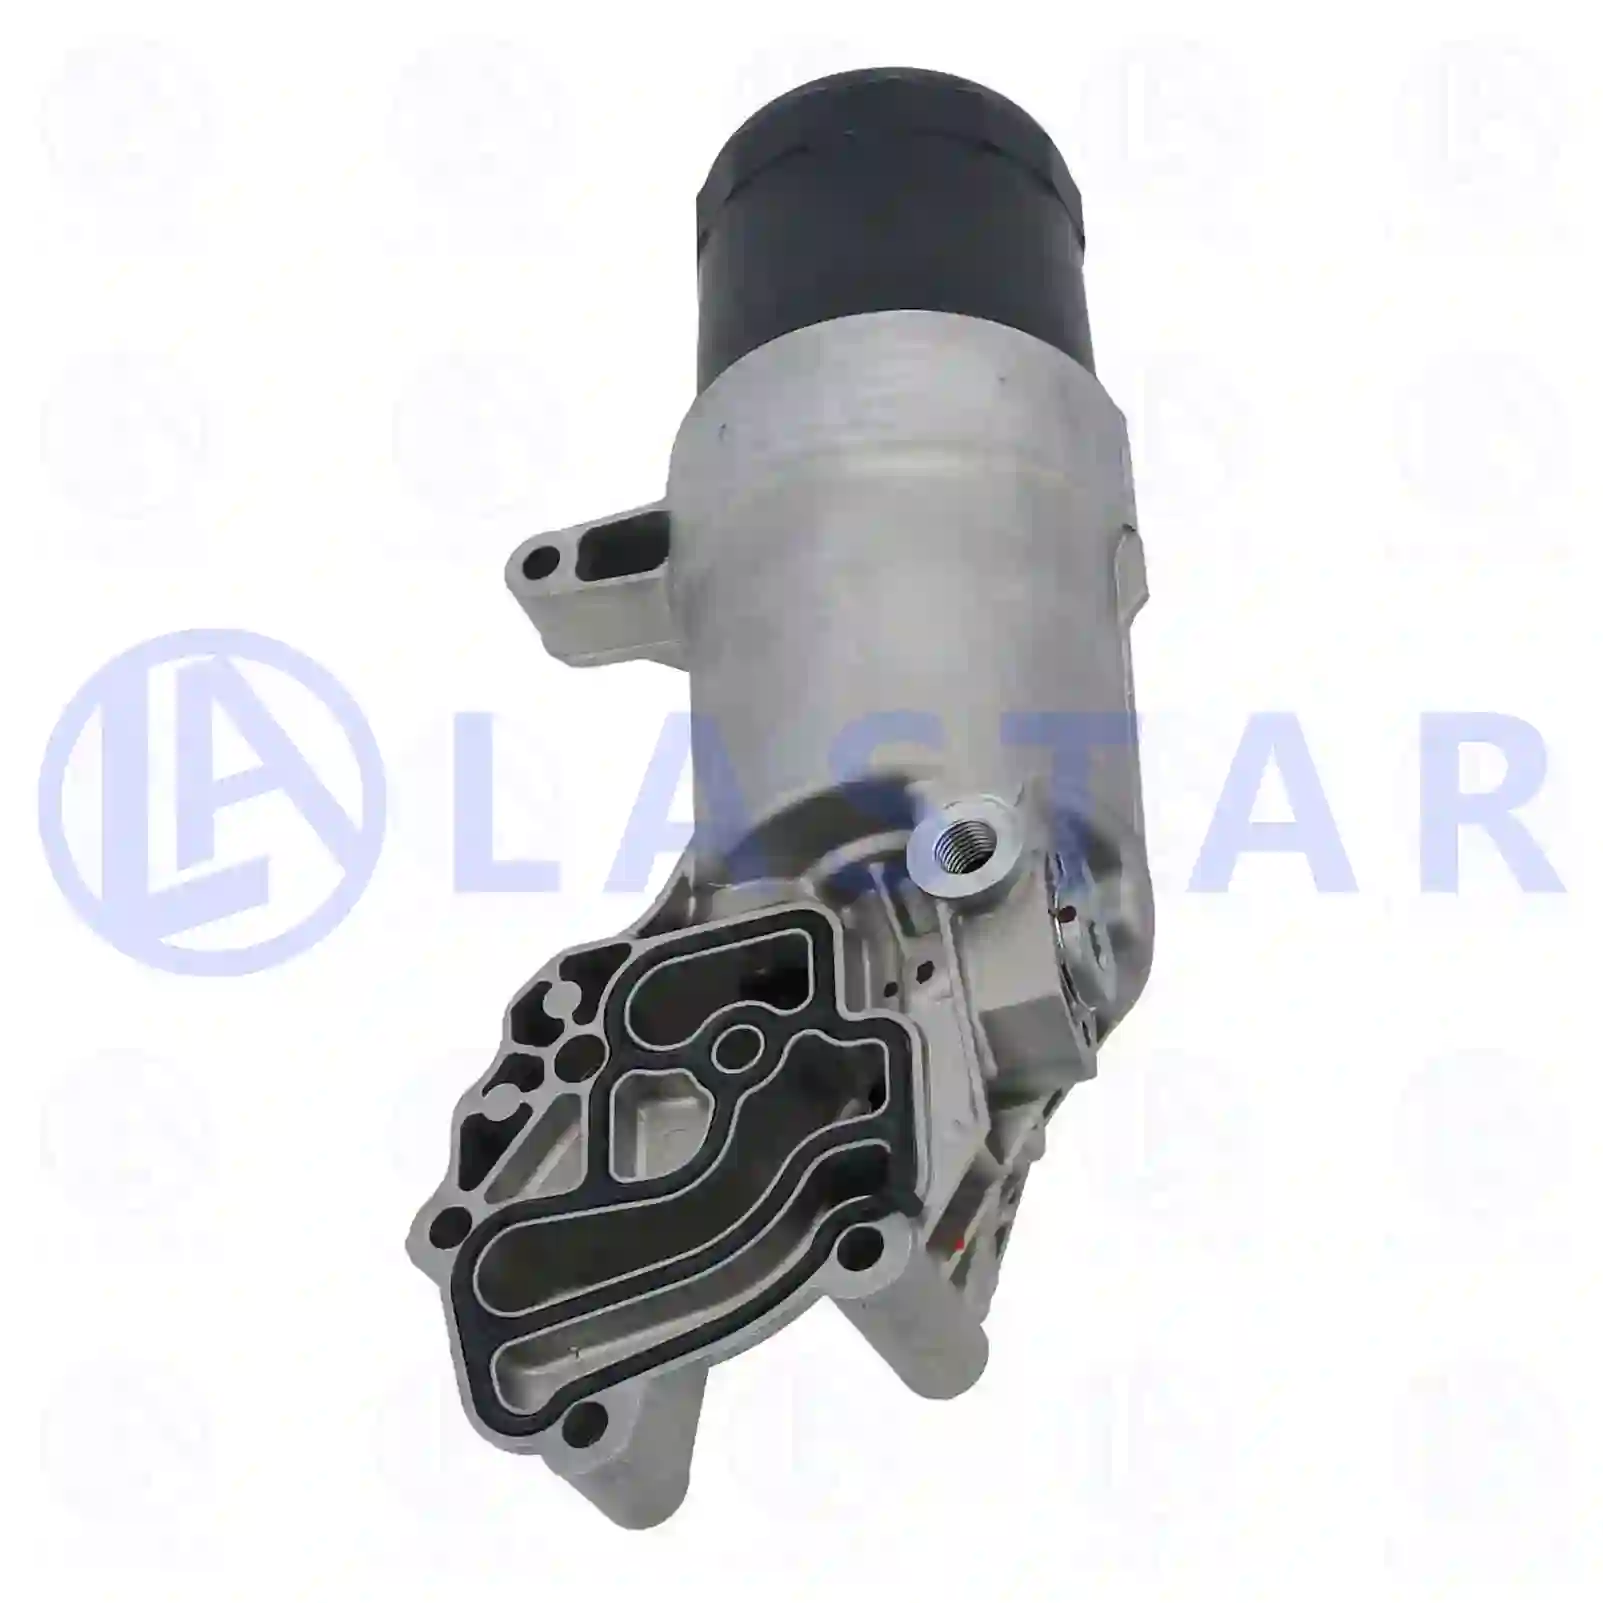 Oil filter housing, complete, with filter, 77702071, 9061801210, 9061801710, ZG01729-0008 ||  77702071 Lastar Spare Part | Truck Spare Parts, Auotomotive Spare Parts Oil filter housing, complete, with filter, 77702071, 9061801210, 9061801710, ZG01729-0008 ||  77702071 Lastar Spare Part | Truck Spare Parts, Auotomotive Spare Parts